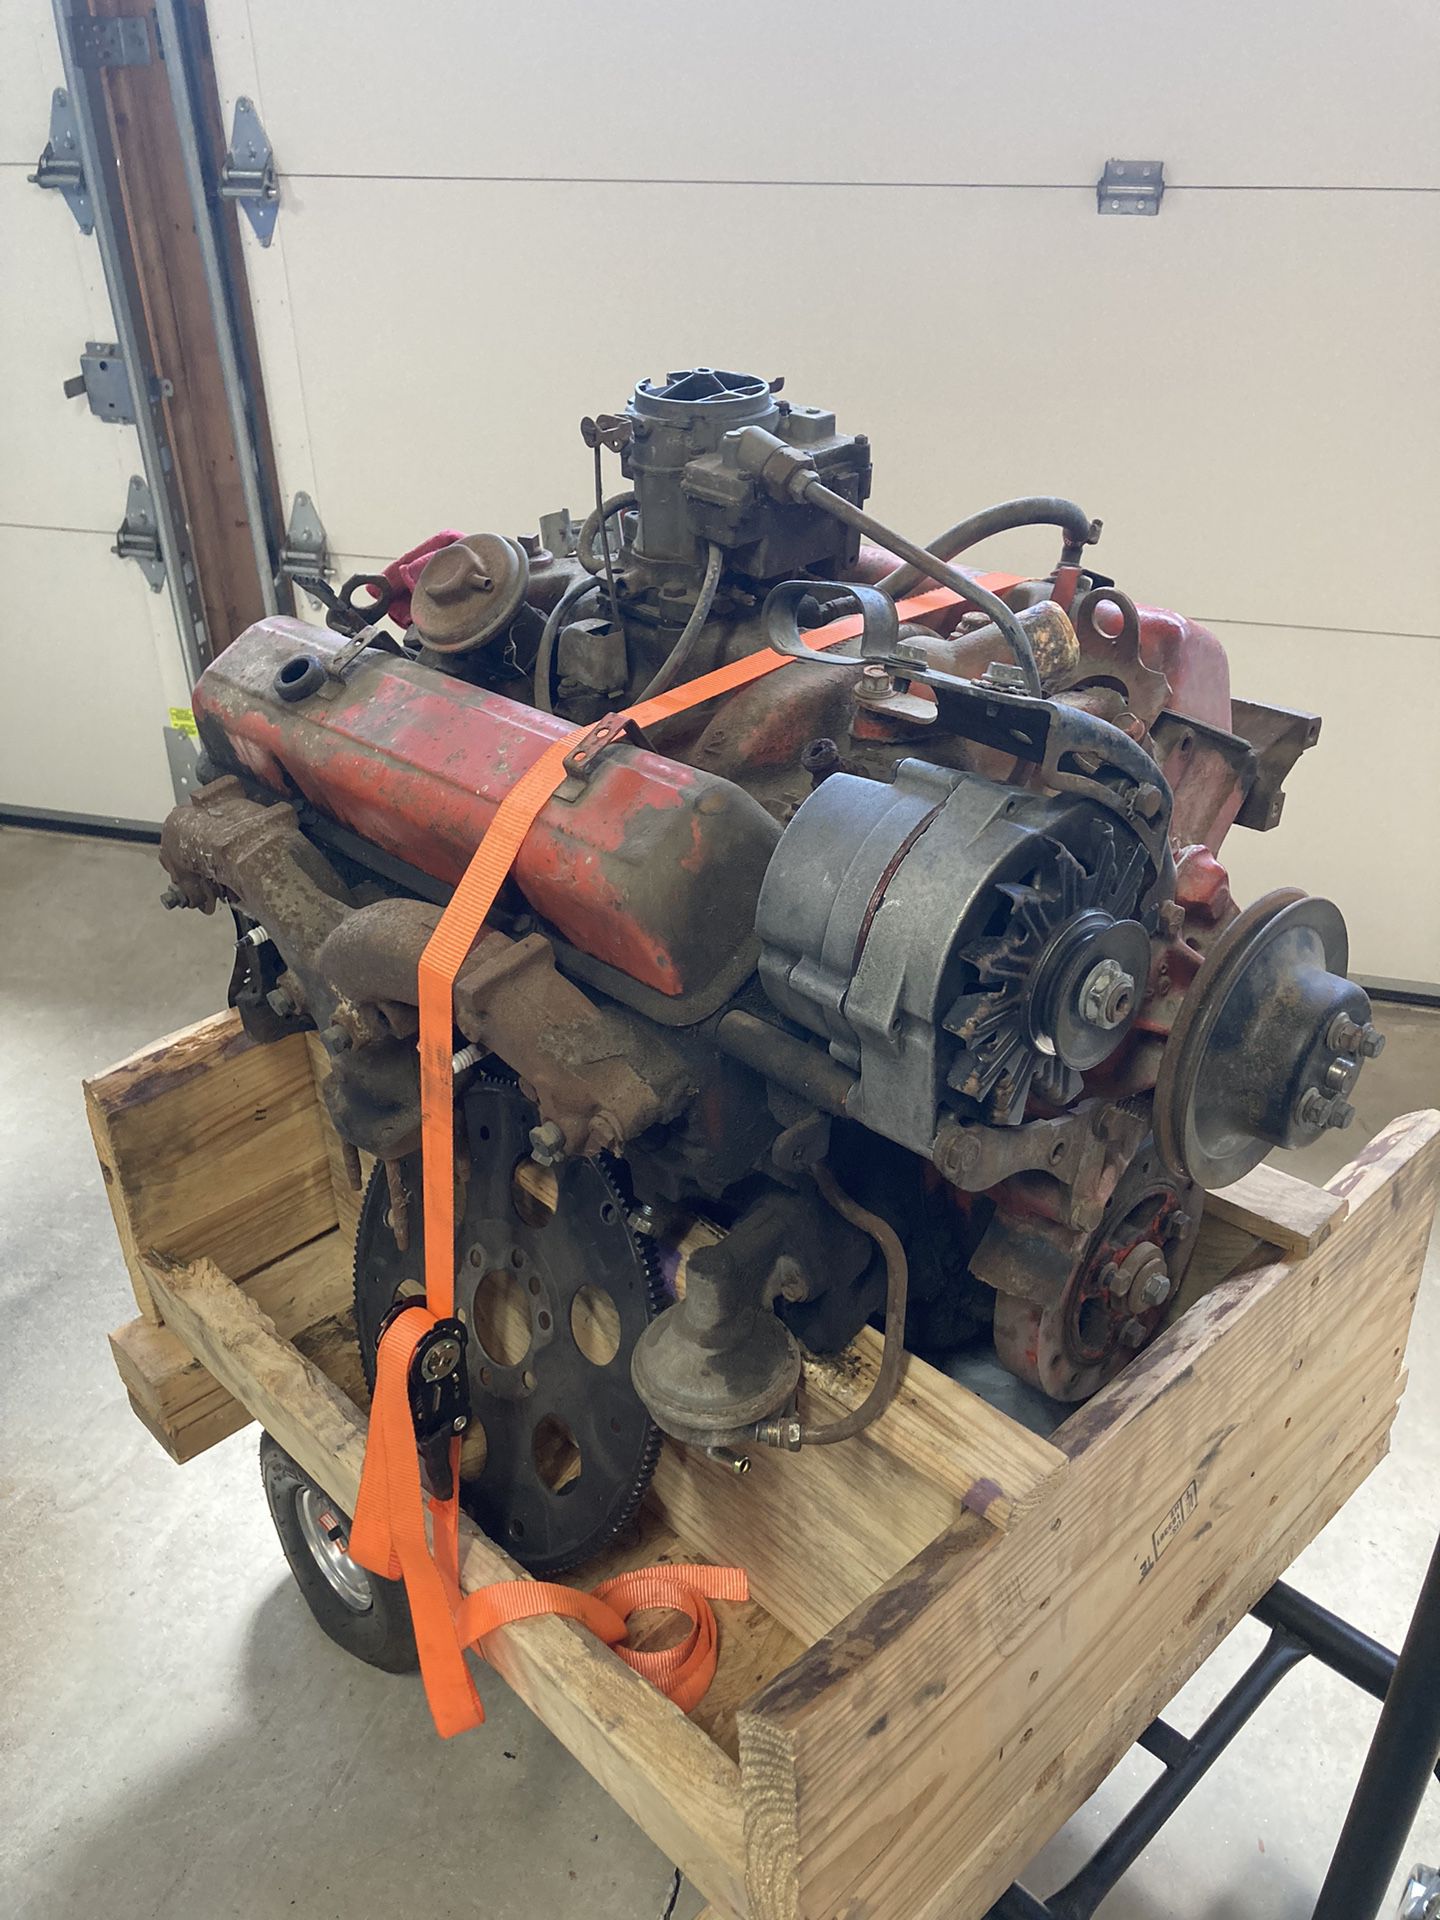 Chevy 350 Engine for Sale in Riverside, CA - OfferUp